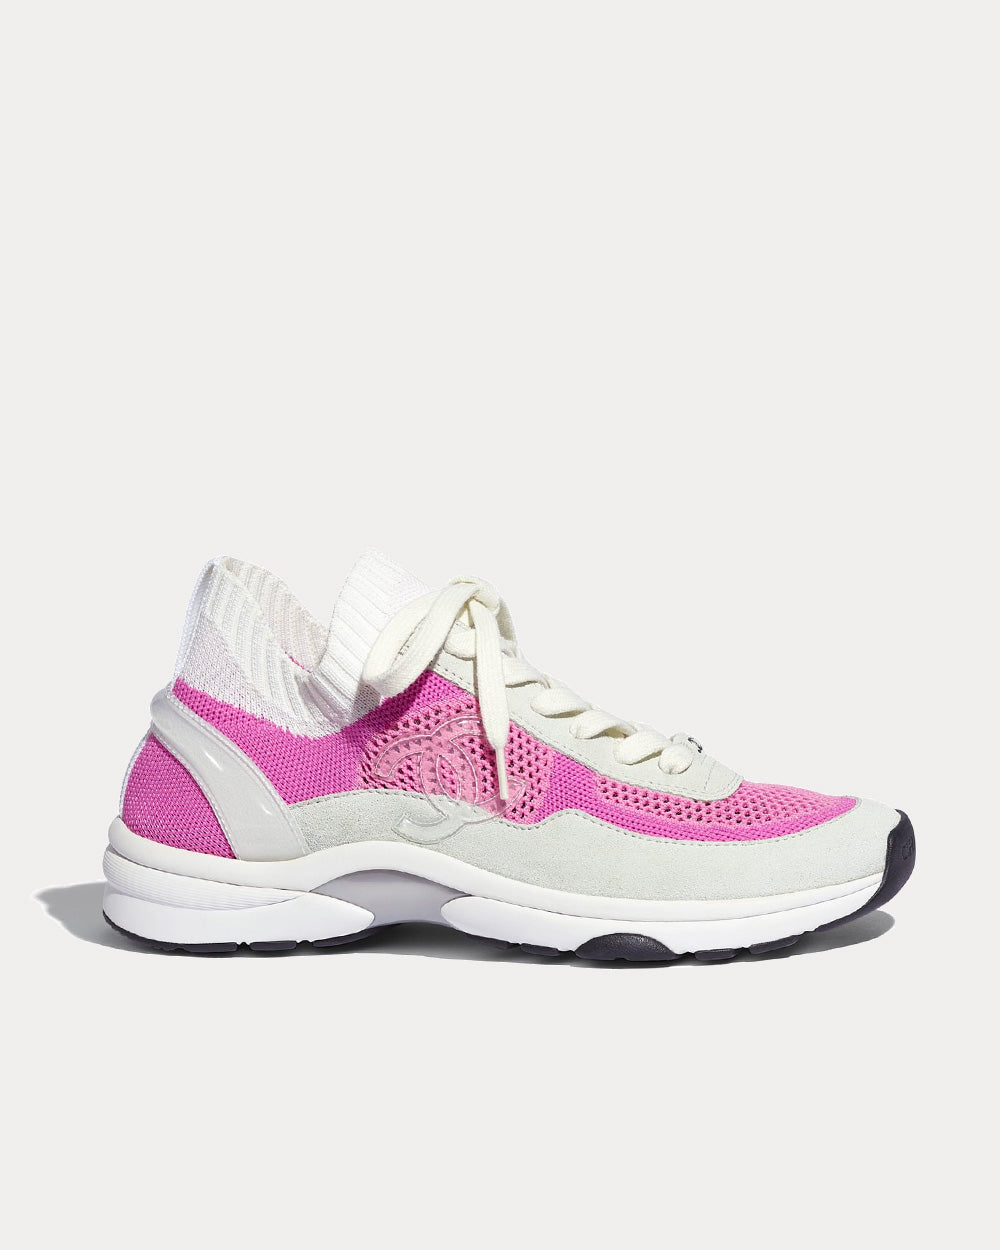 Chanel Pink & White Low Top Sneakers - Sneak in Peace